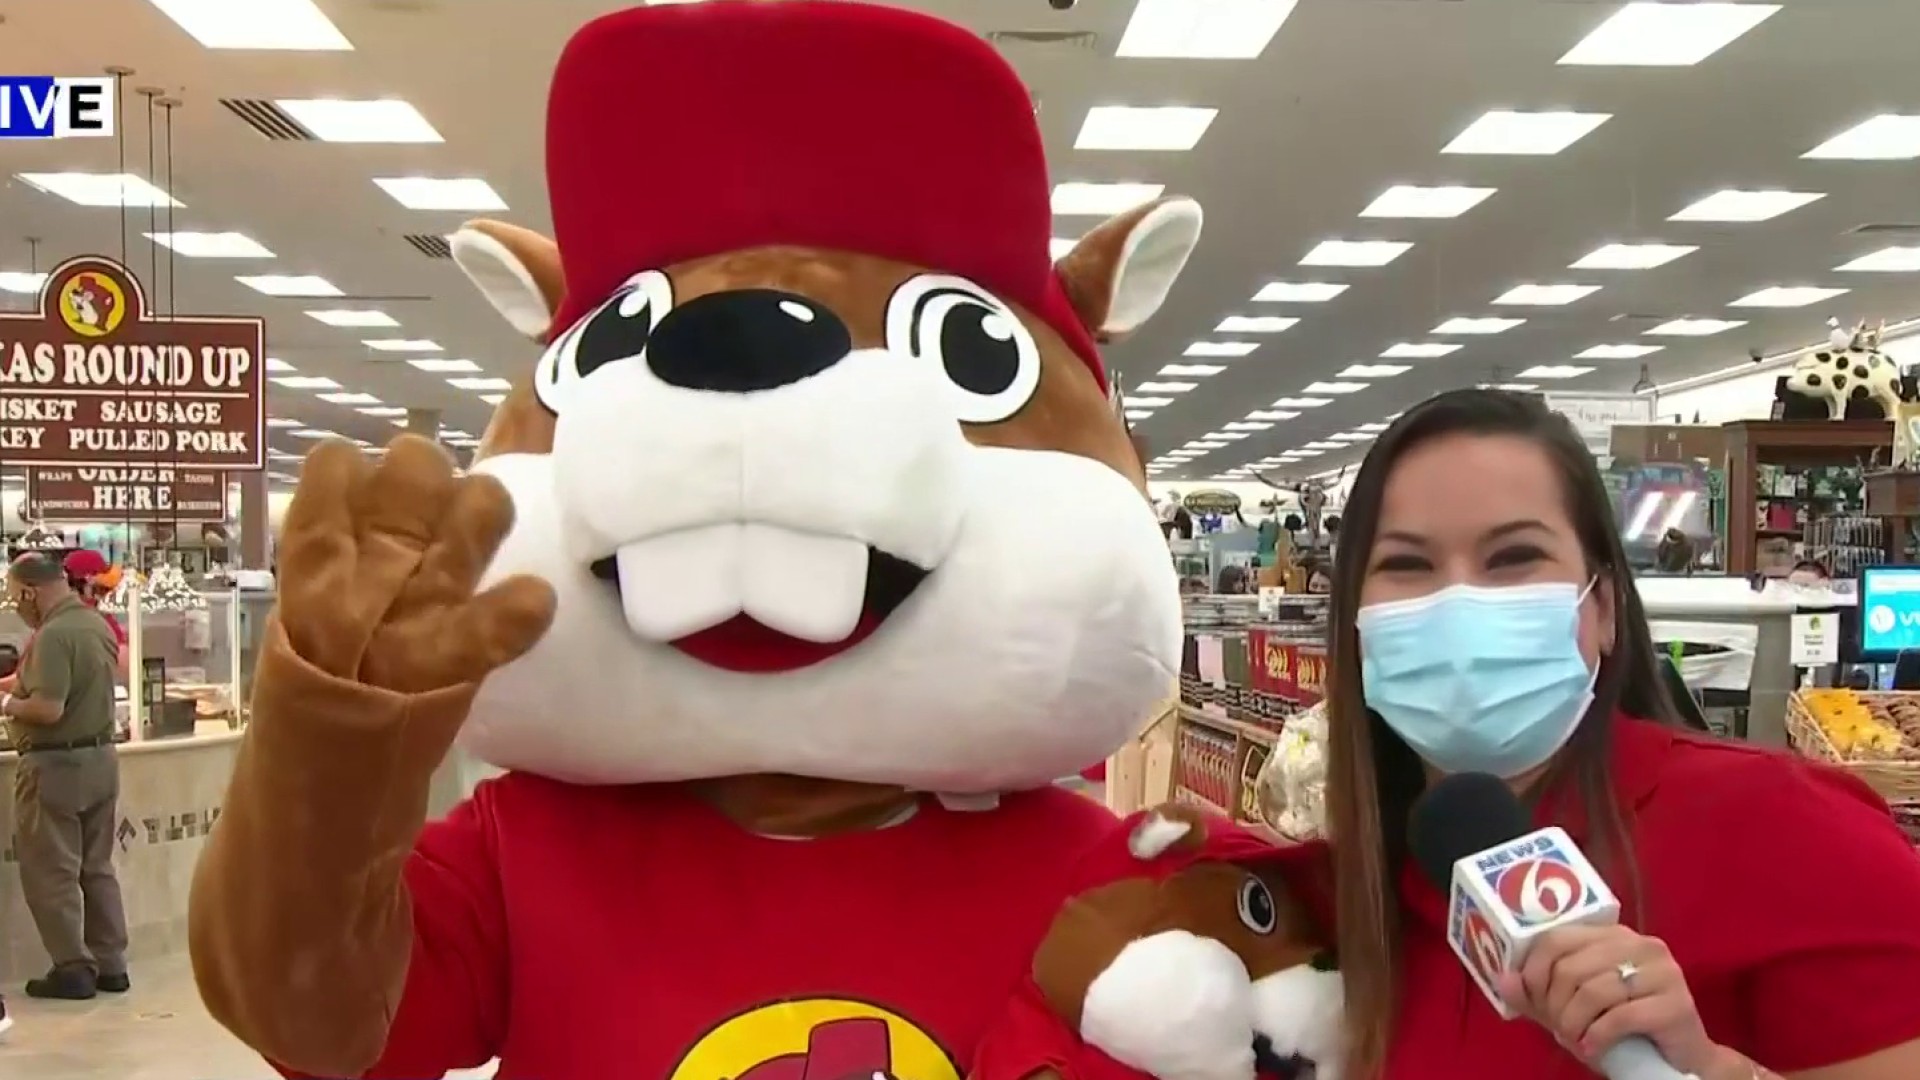 BukIIs store goes viral in Mexico Bucees to take action  wfaacom